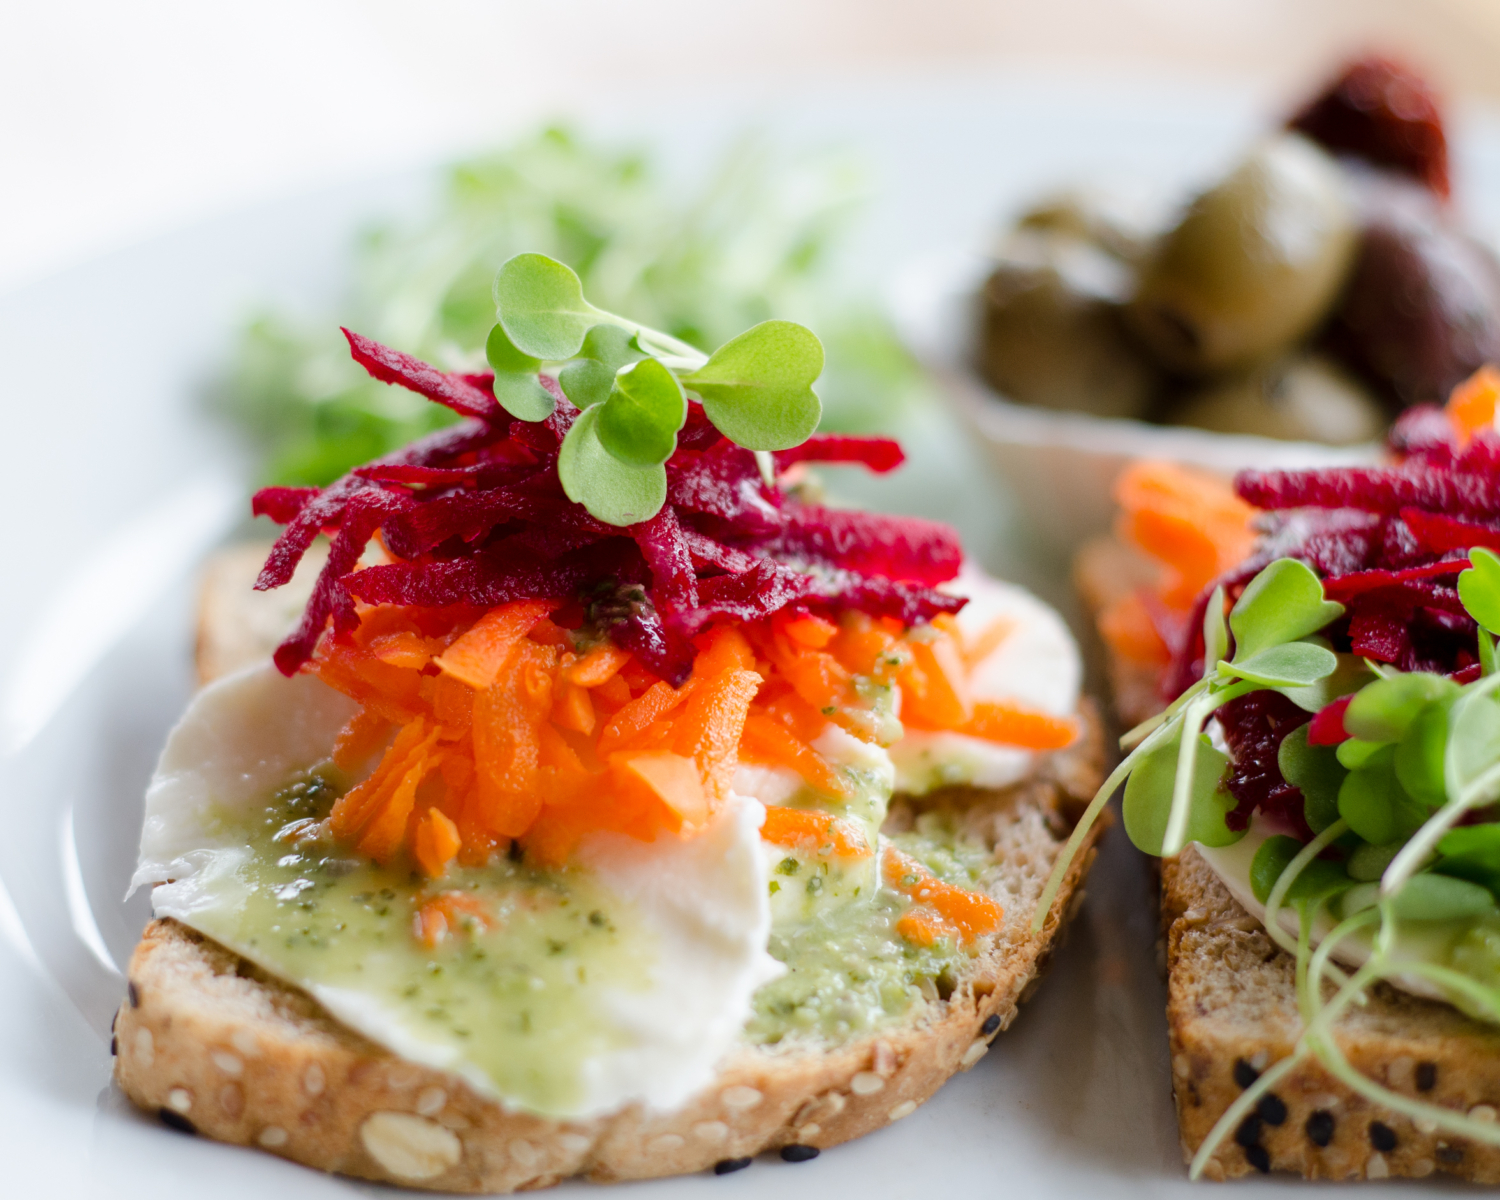 Quick and healthy lunch ideas - try these open faced sandwiches next time you're wondering what to eat for lunch. They're all super fast to make, taste amazing, and will keep you full all afternoon!